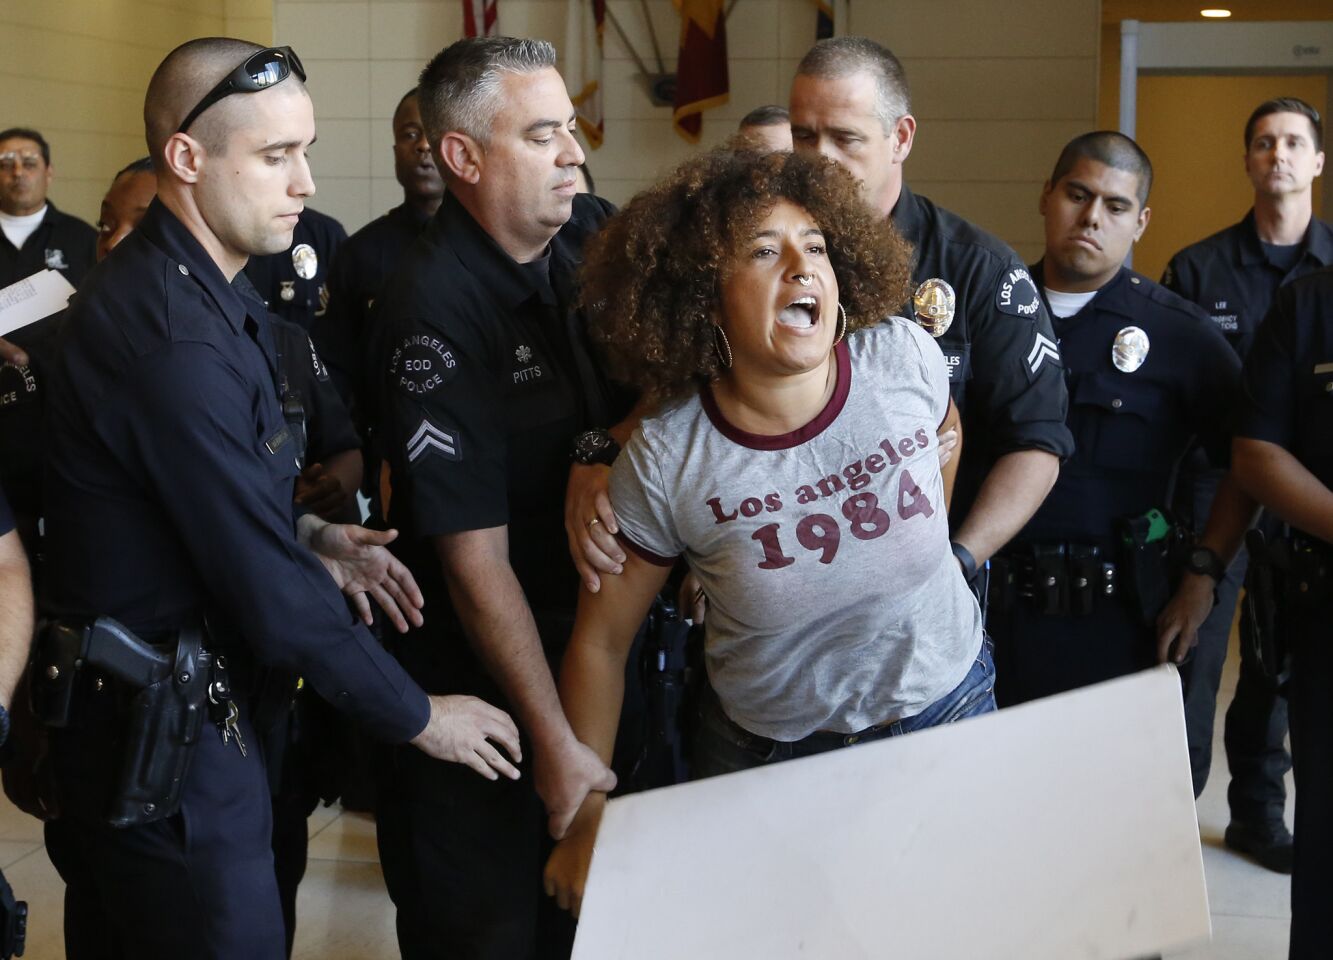 LAPD officers arrest a protester in the lobby of the police headquarters on suspicion of failure to disperse after Chief Charlie Beck gave details to the media about the shooting death of Carnell Snell Jr.